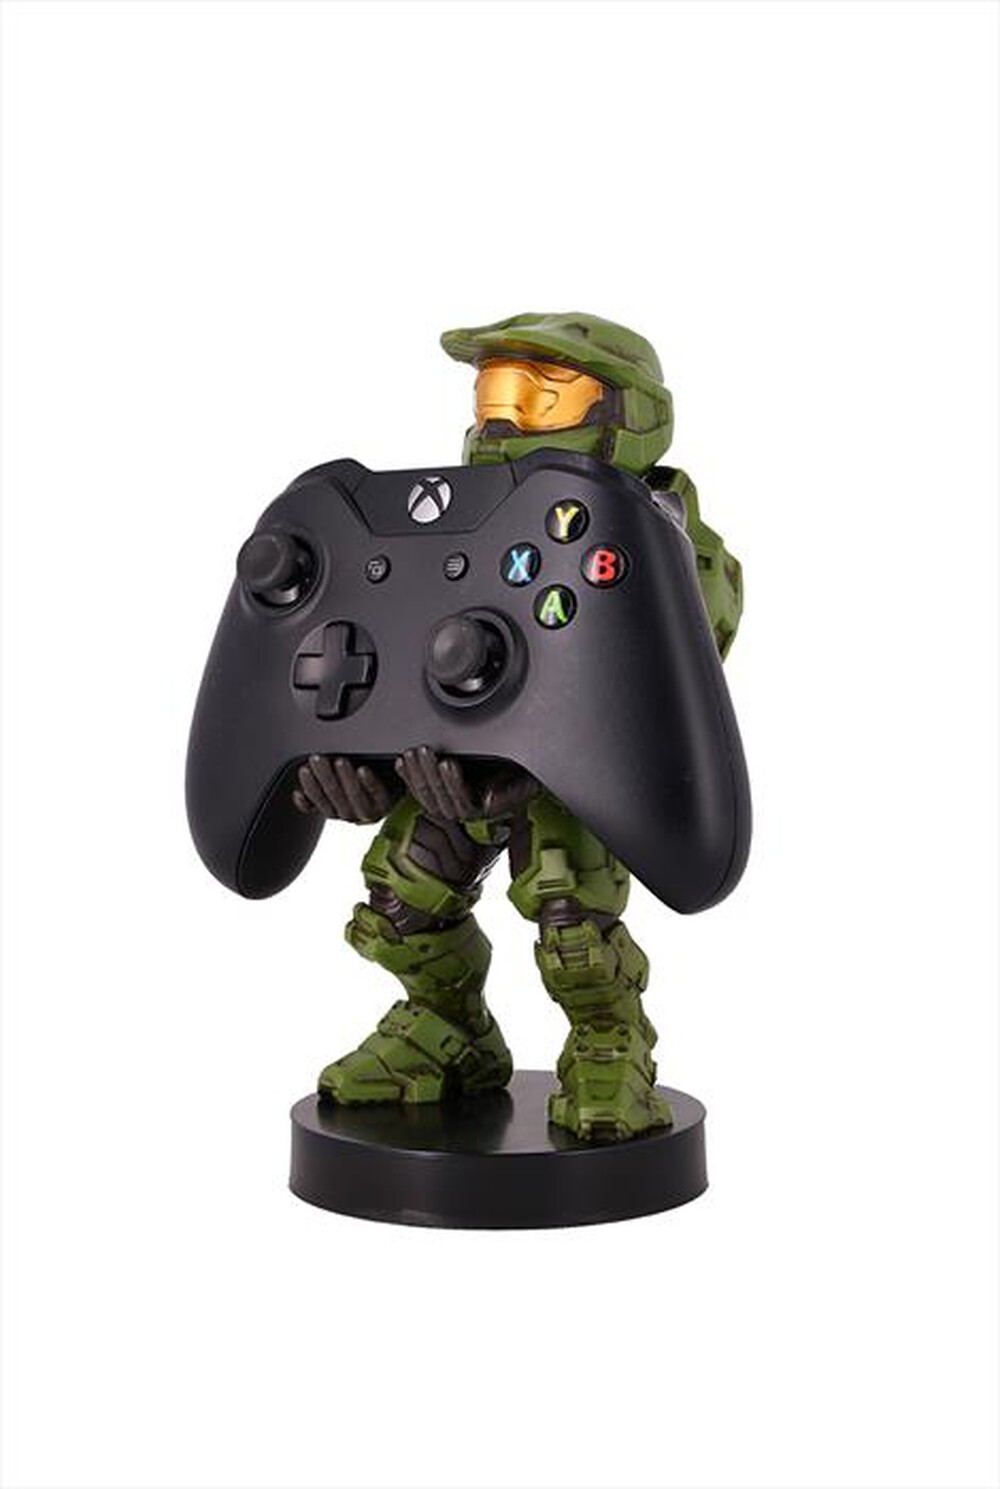 "EXQUISITE GAMING - MASTER CHIEF INFINITE CABLE GUY"